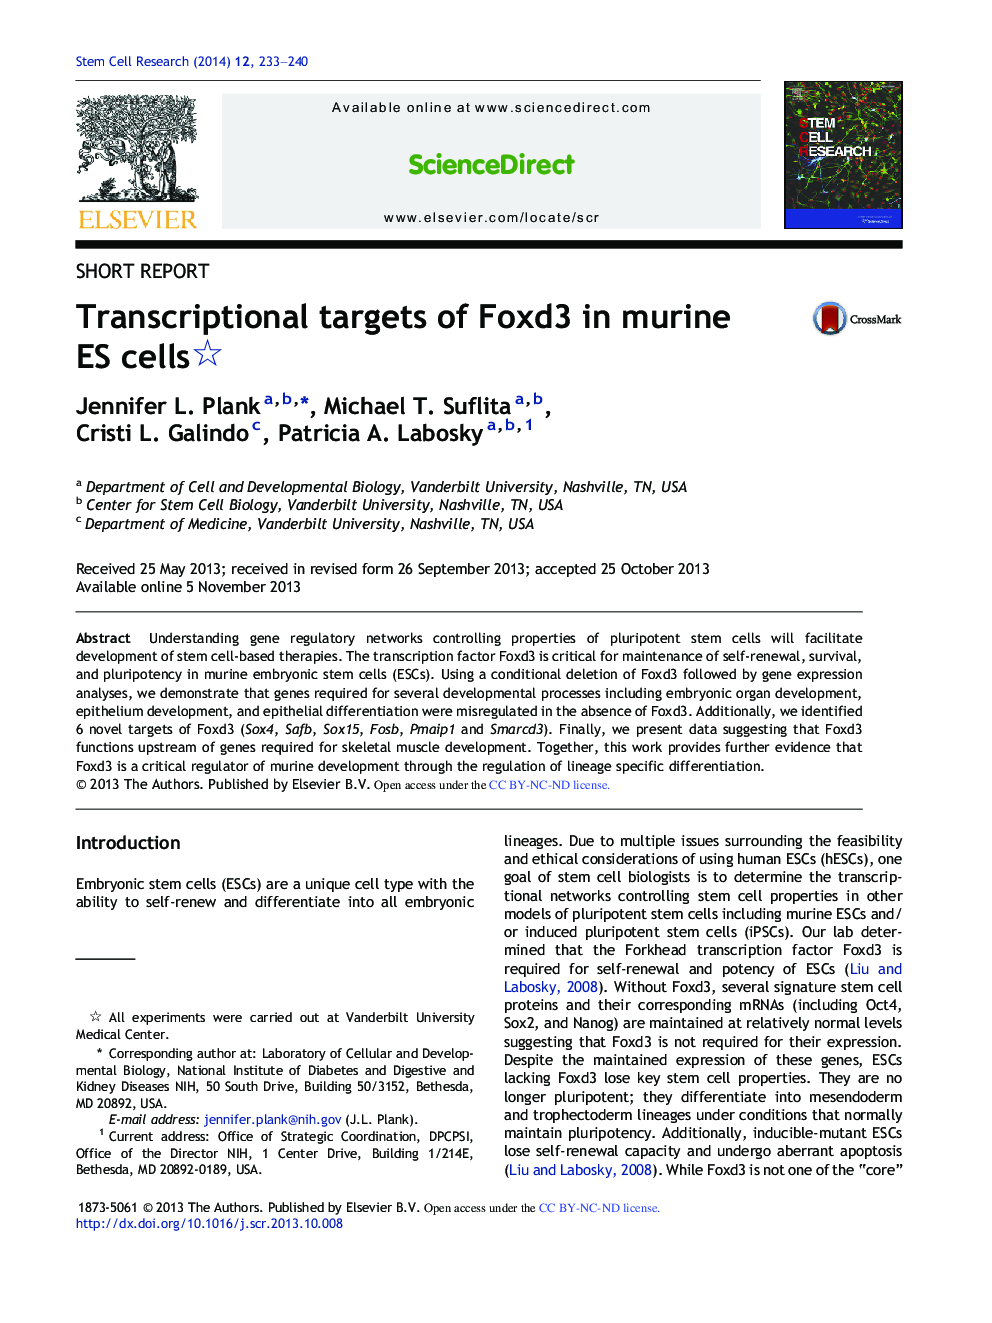 Transcriptional targets of Foxd3 in murine ES cells 